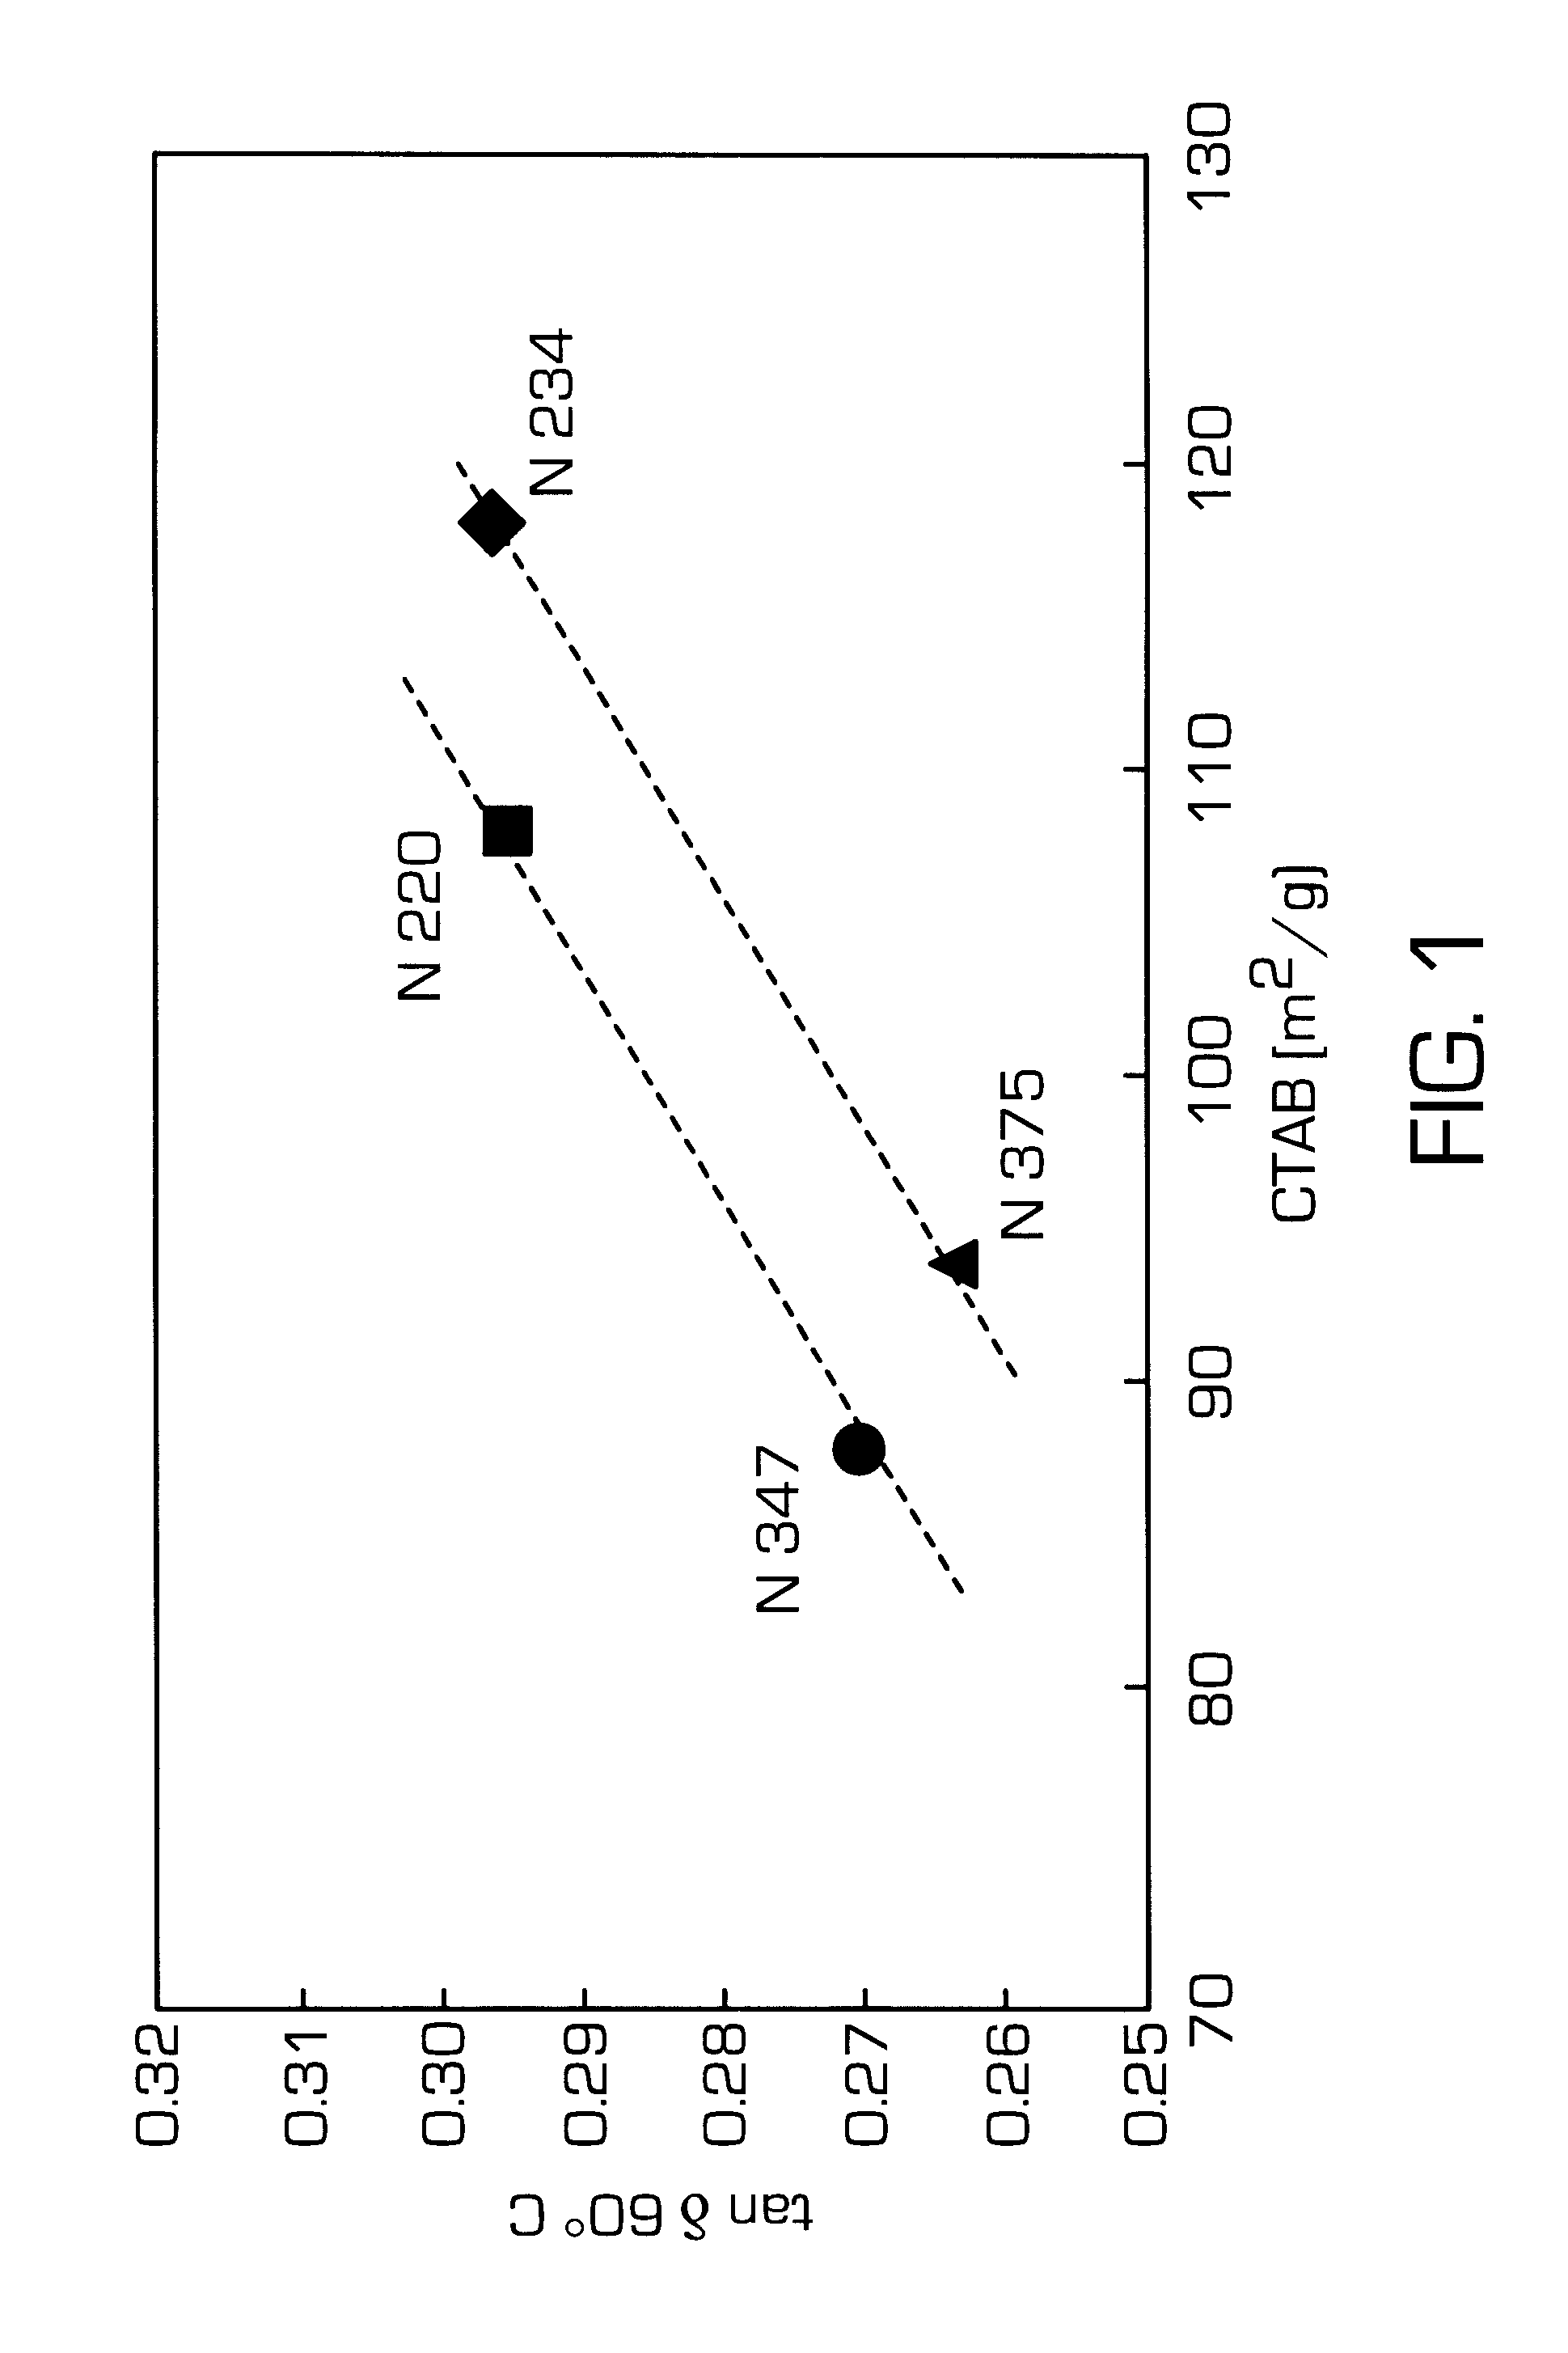 Inversion carbon blacks and method for their manufacture